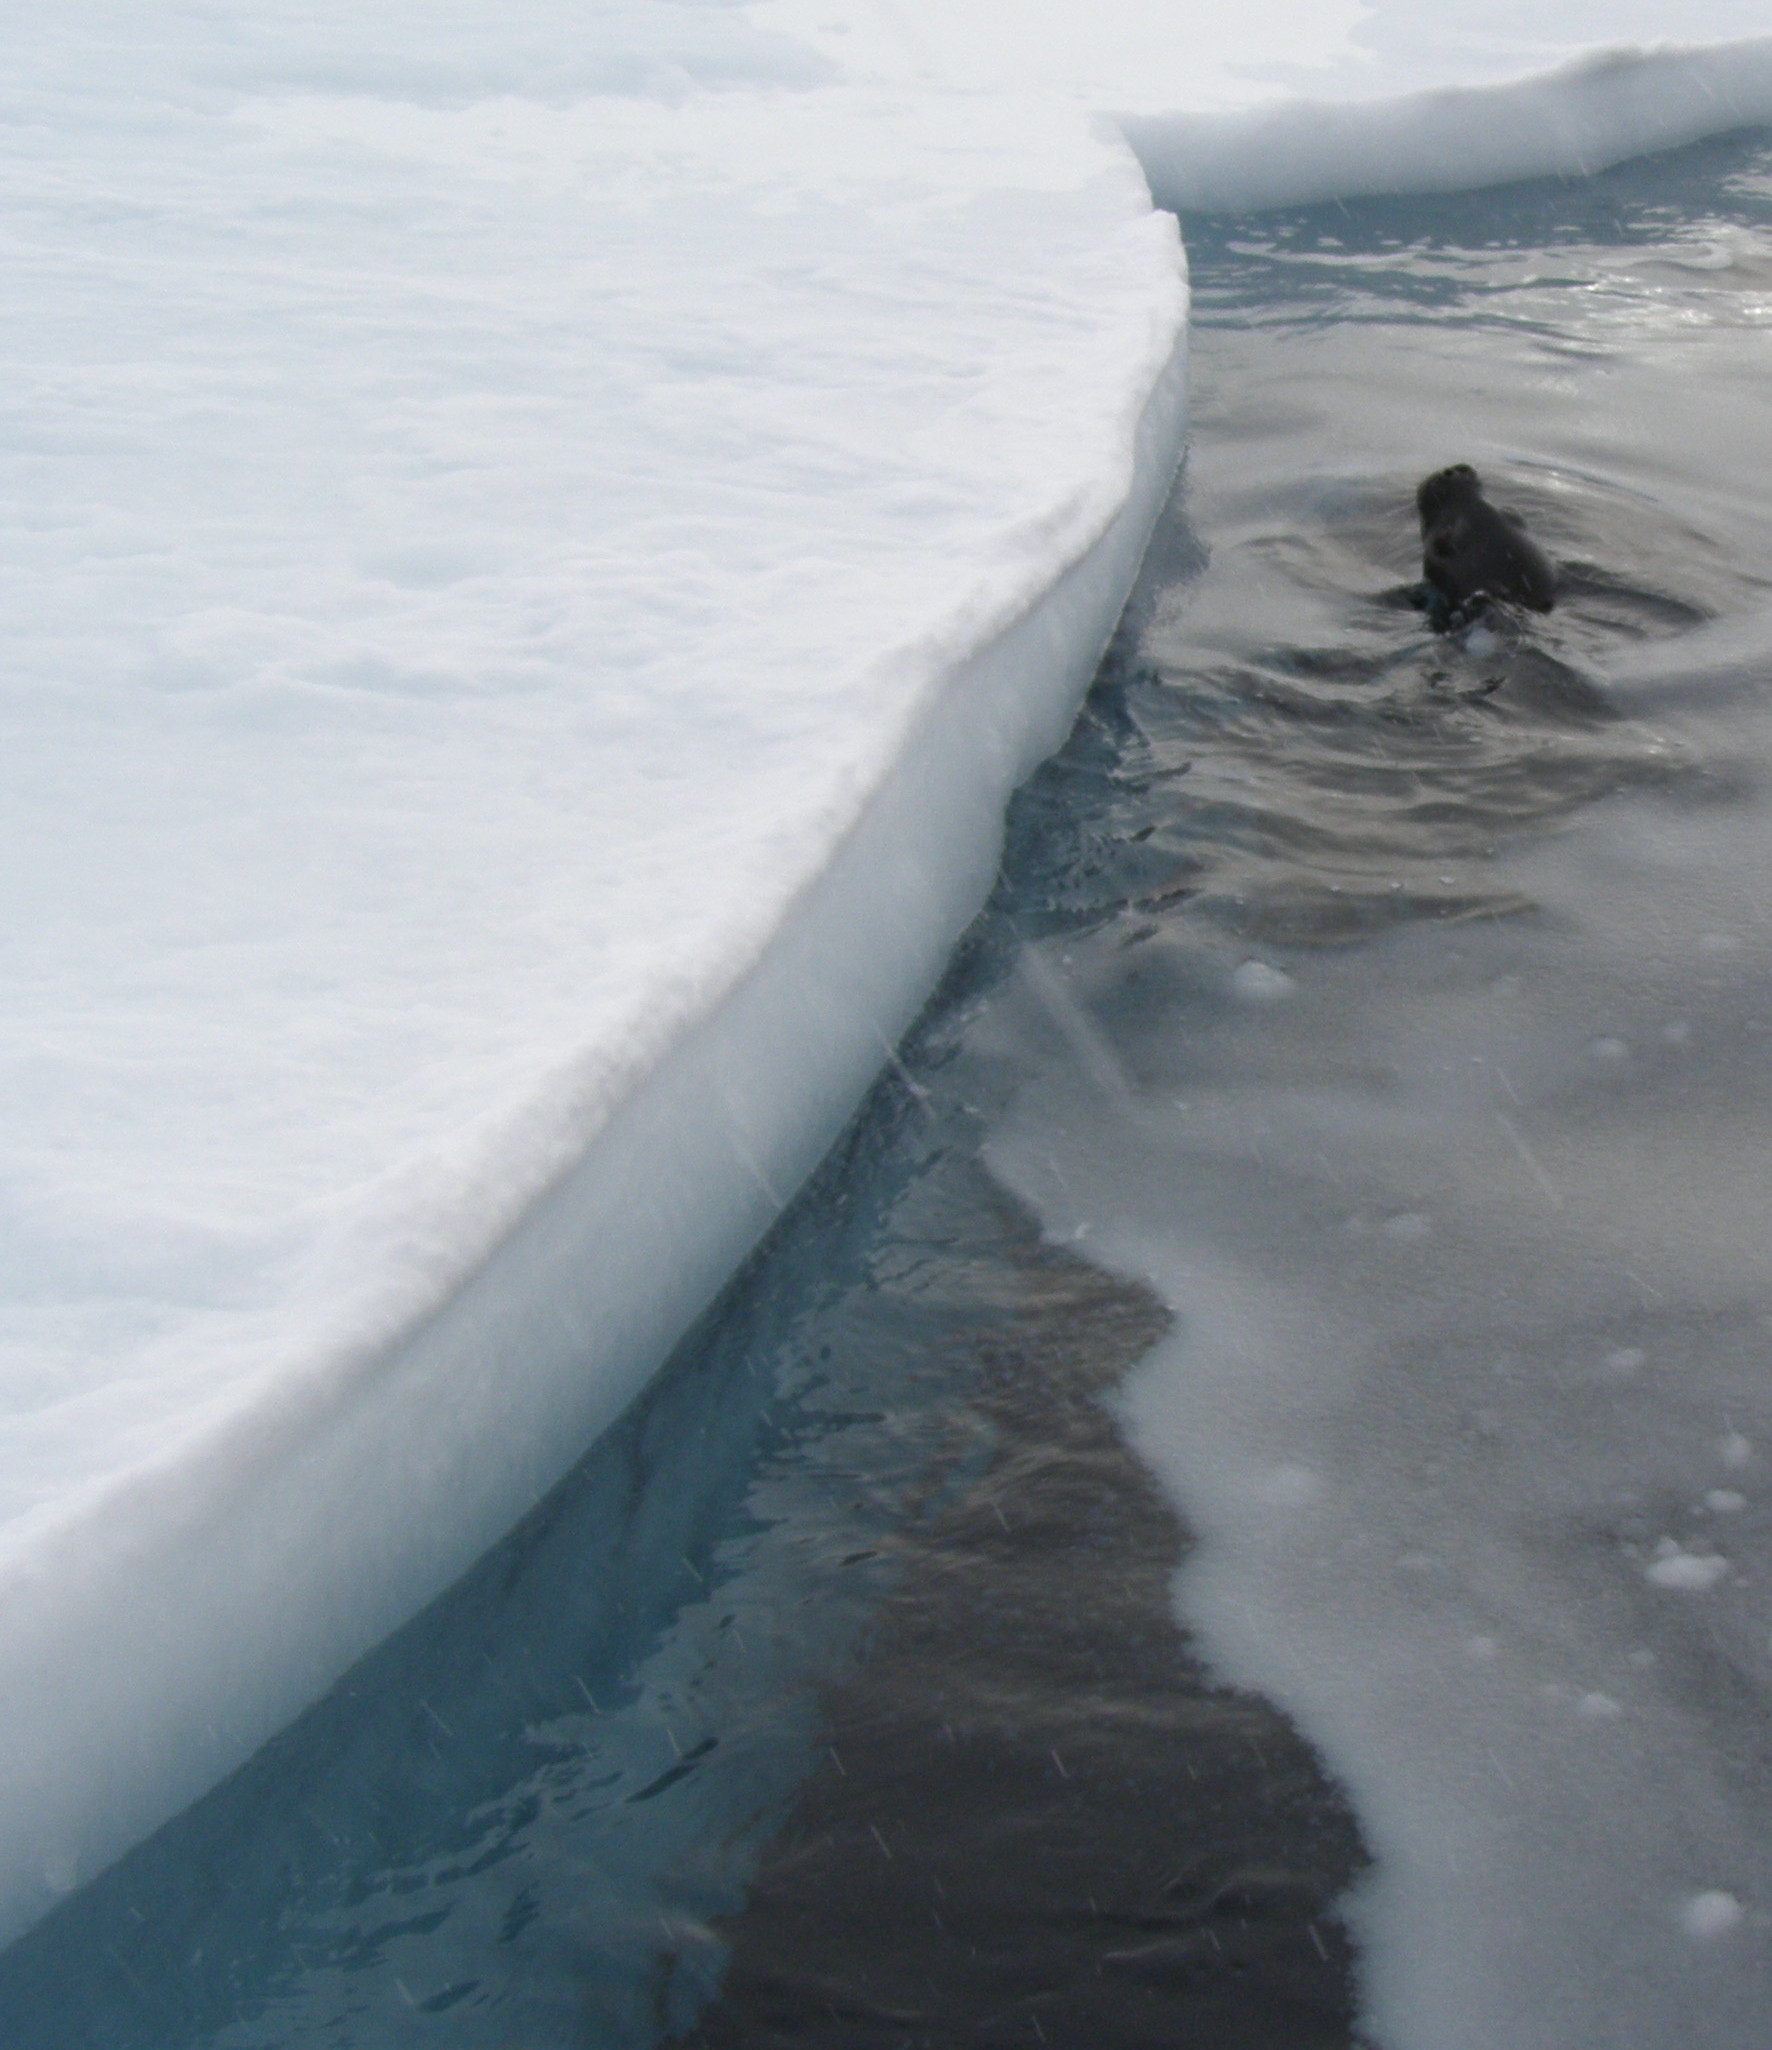 The bottom of the sea ice can be seen in this picture. A nearby Weddell Seal watched us.